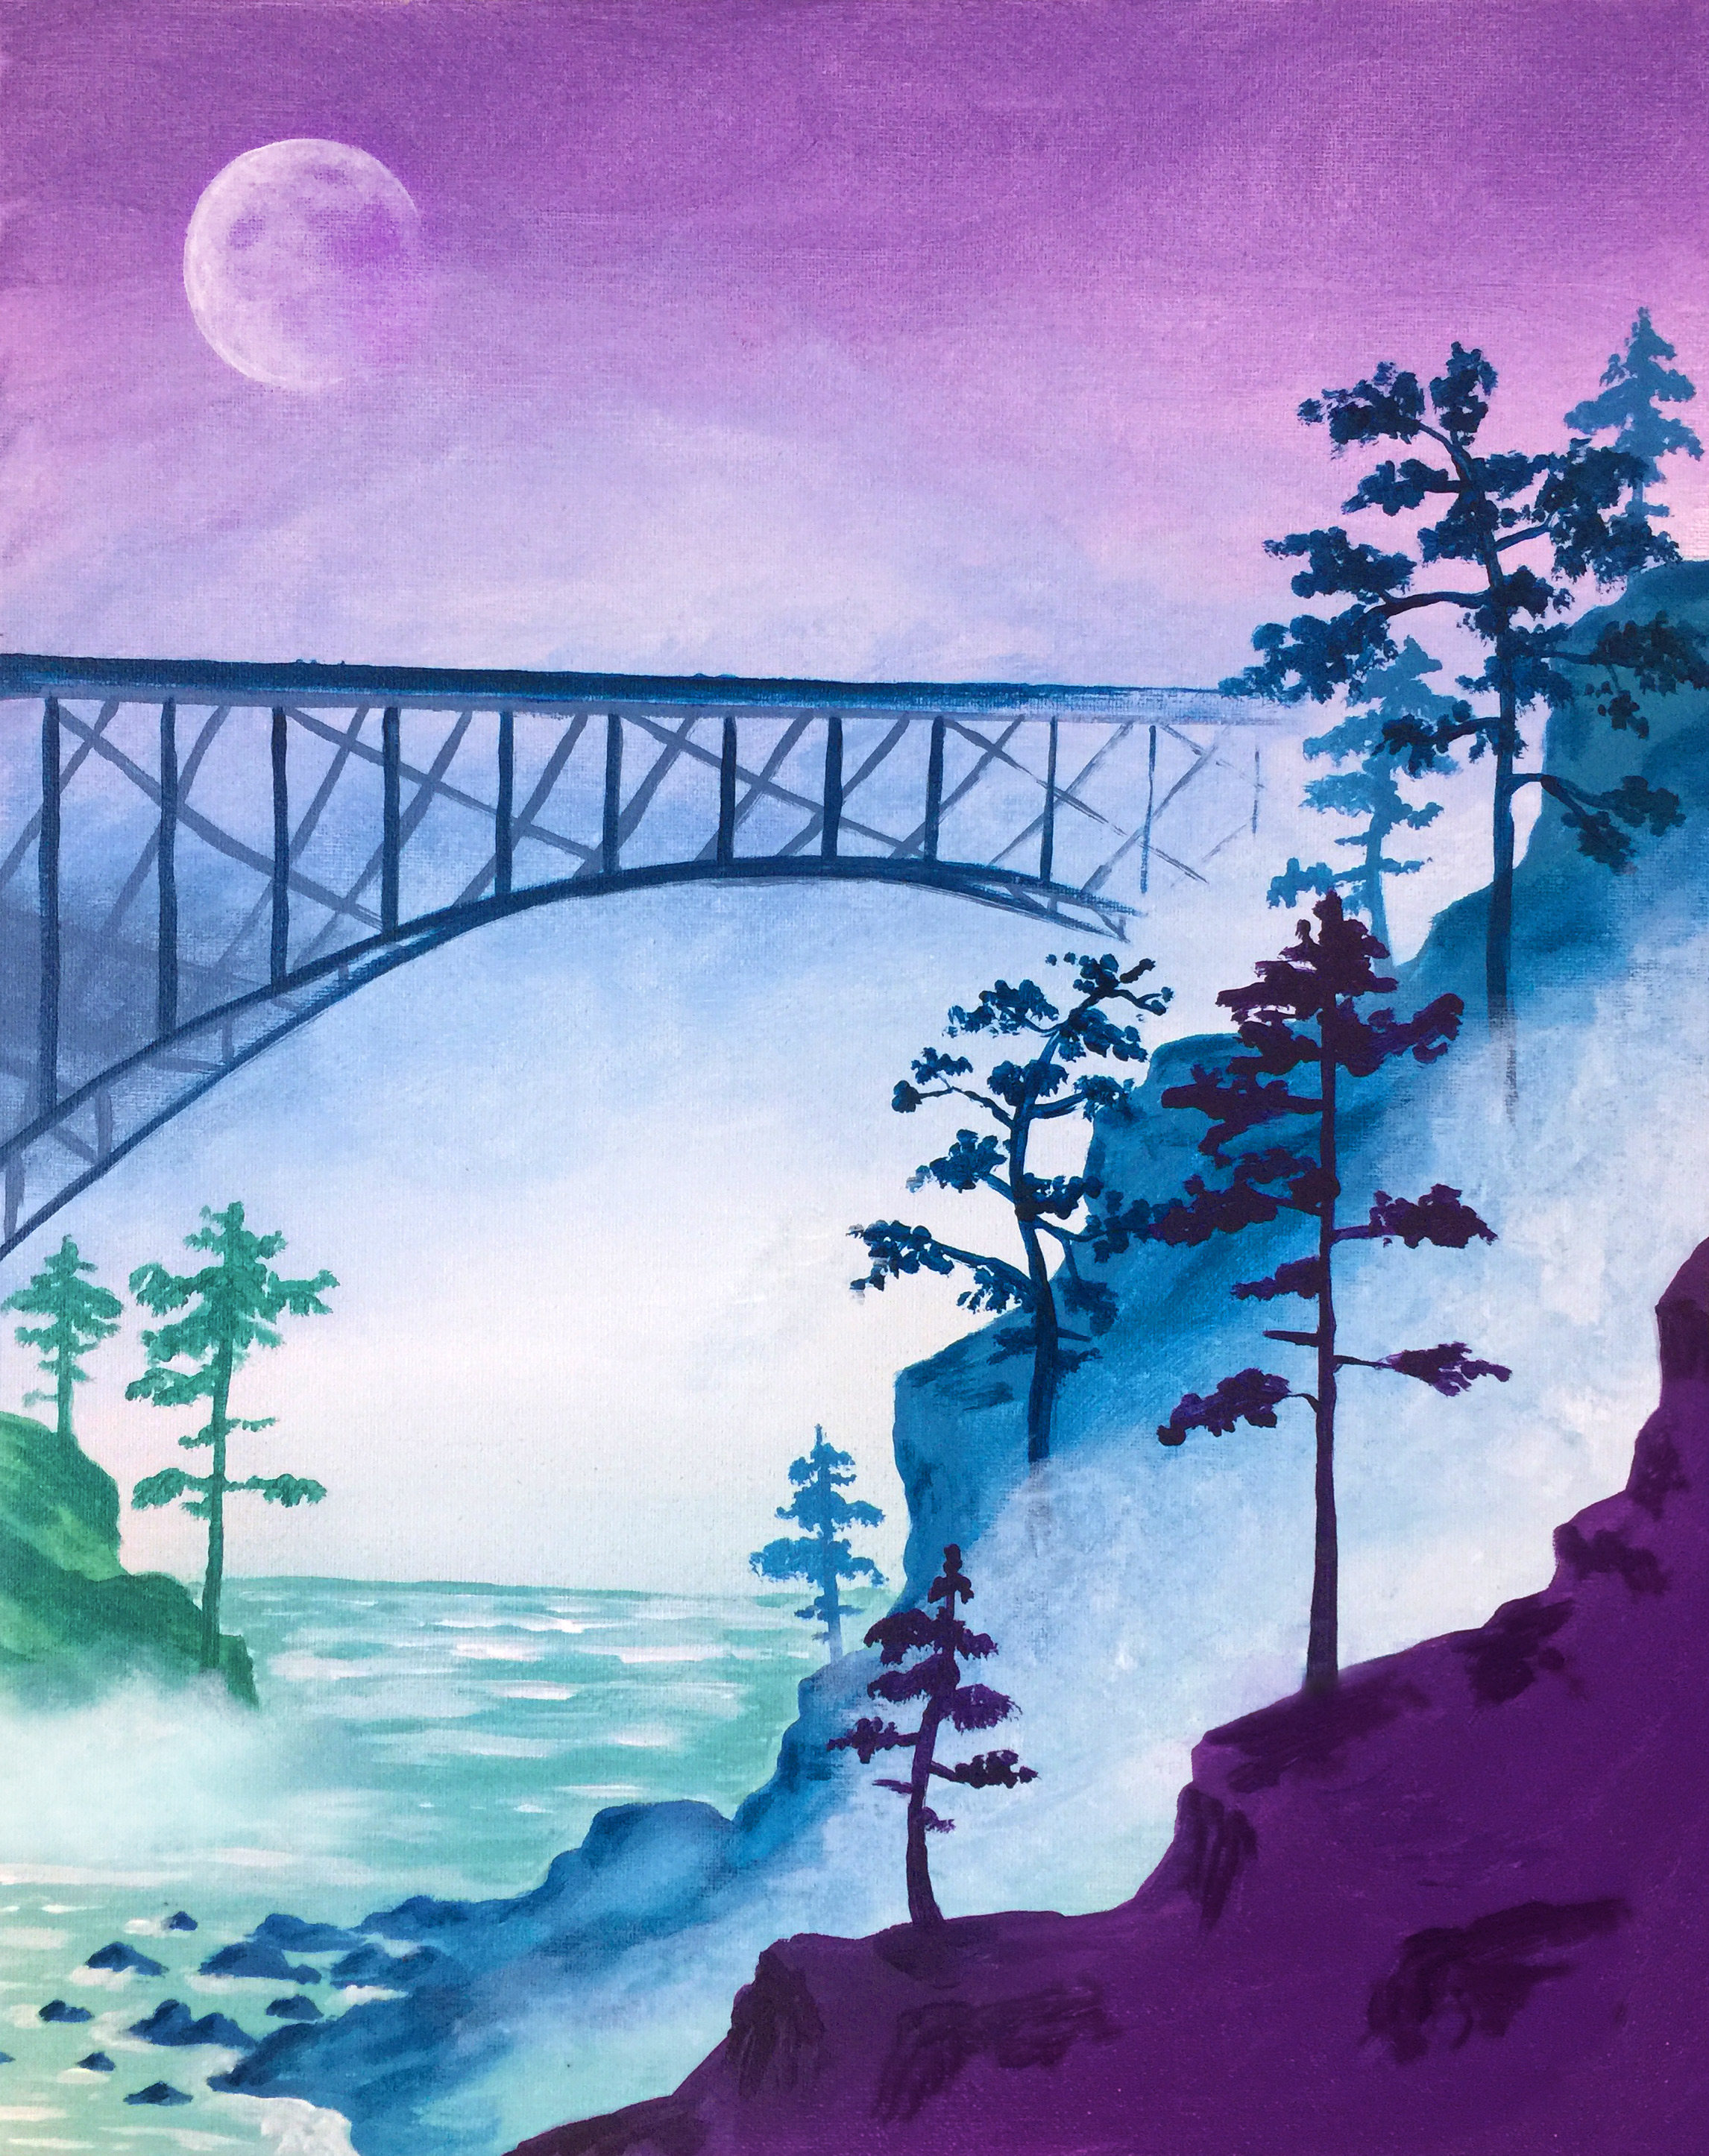 A Bridge In The Mist paint nite project by Yaymaker